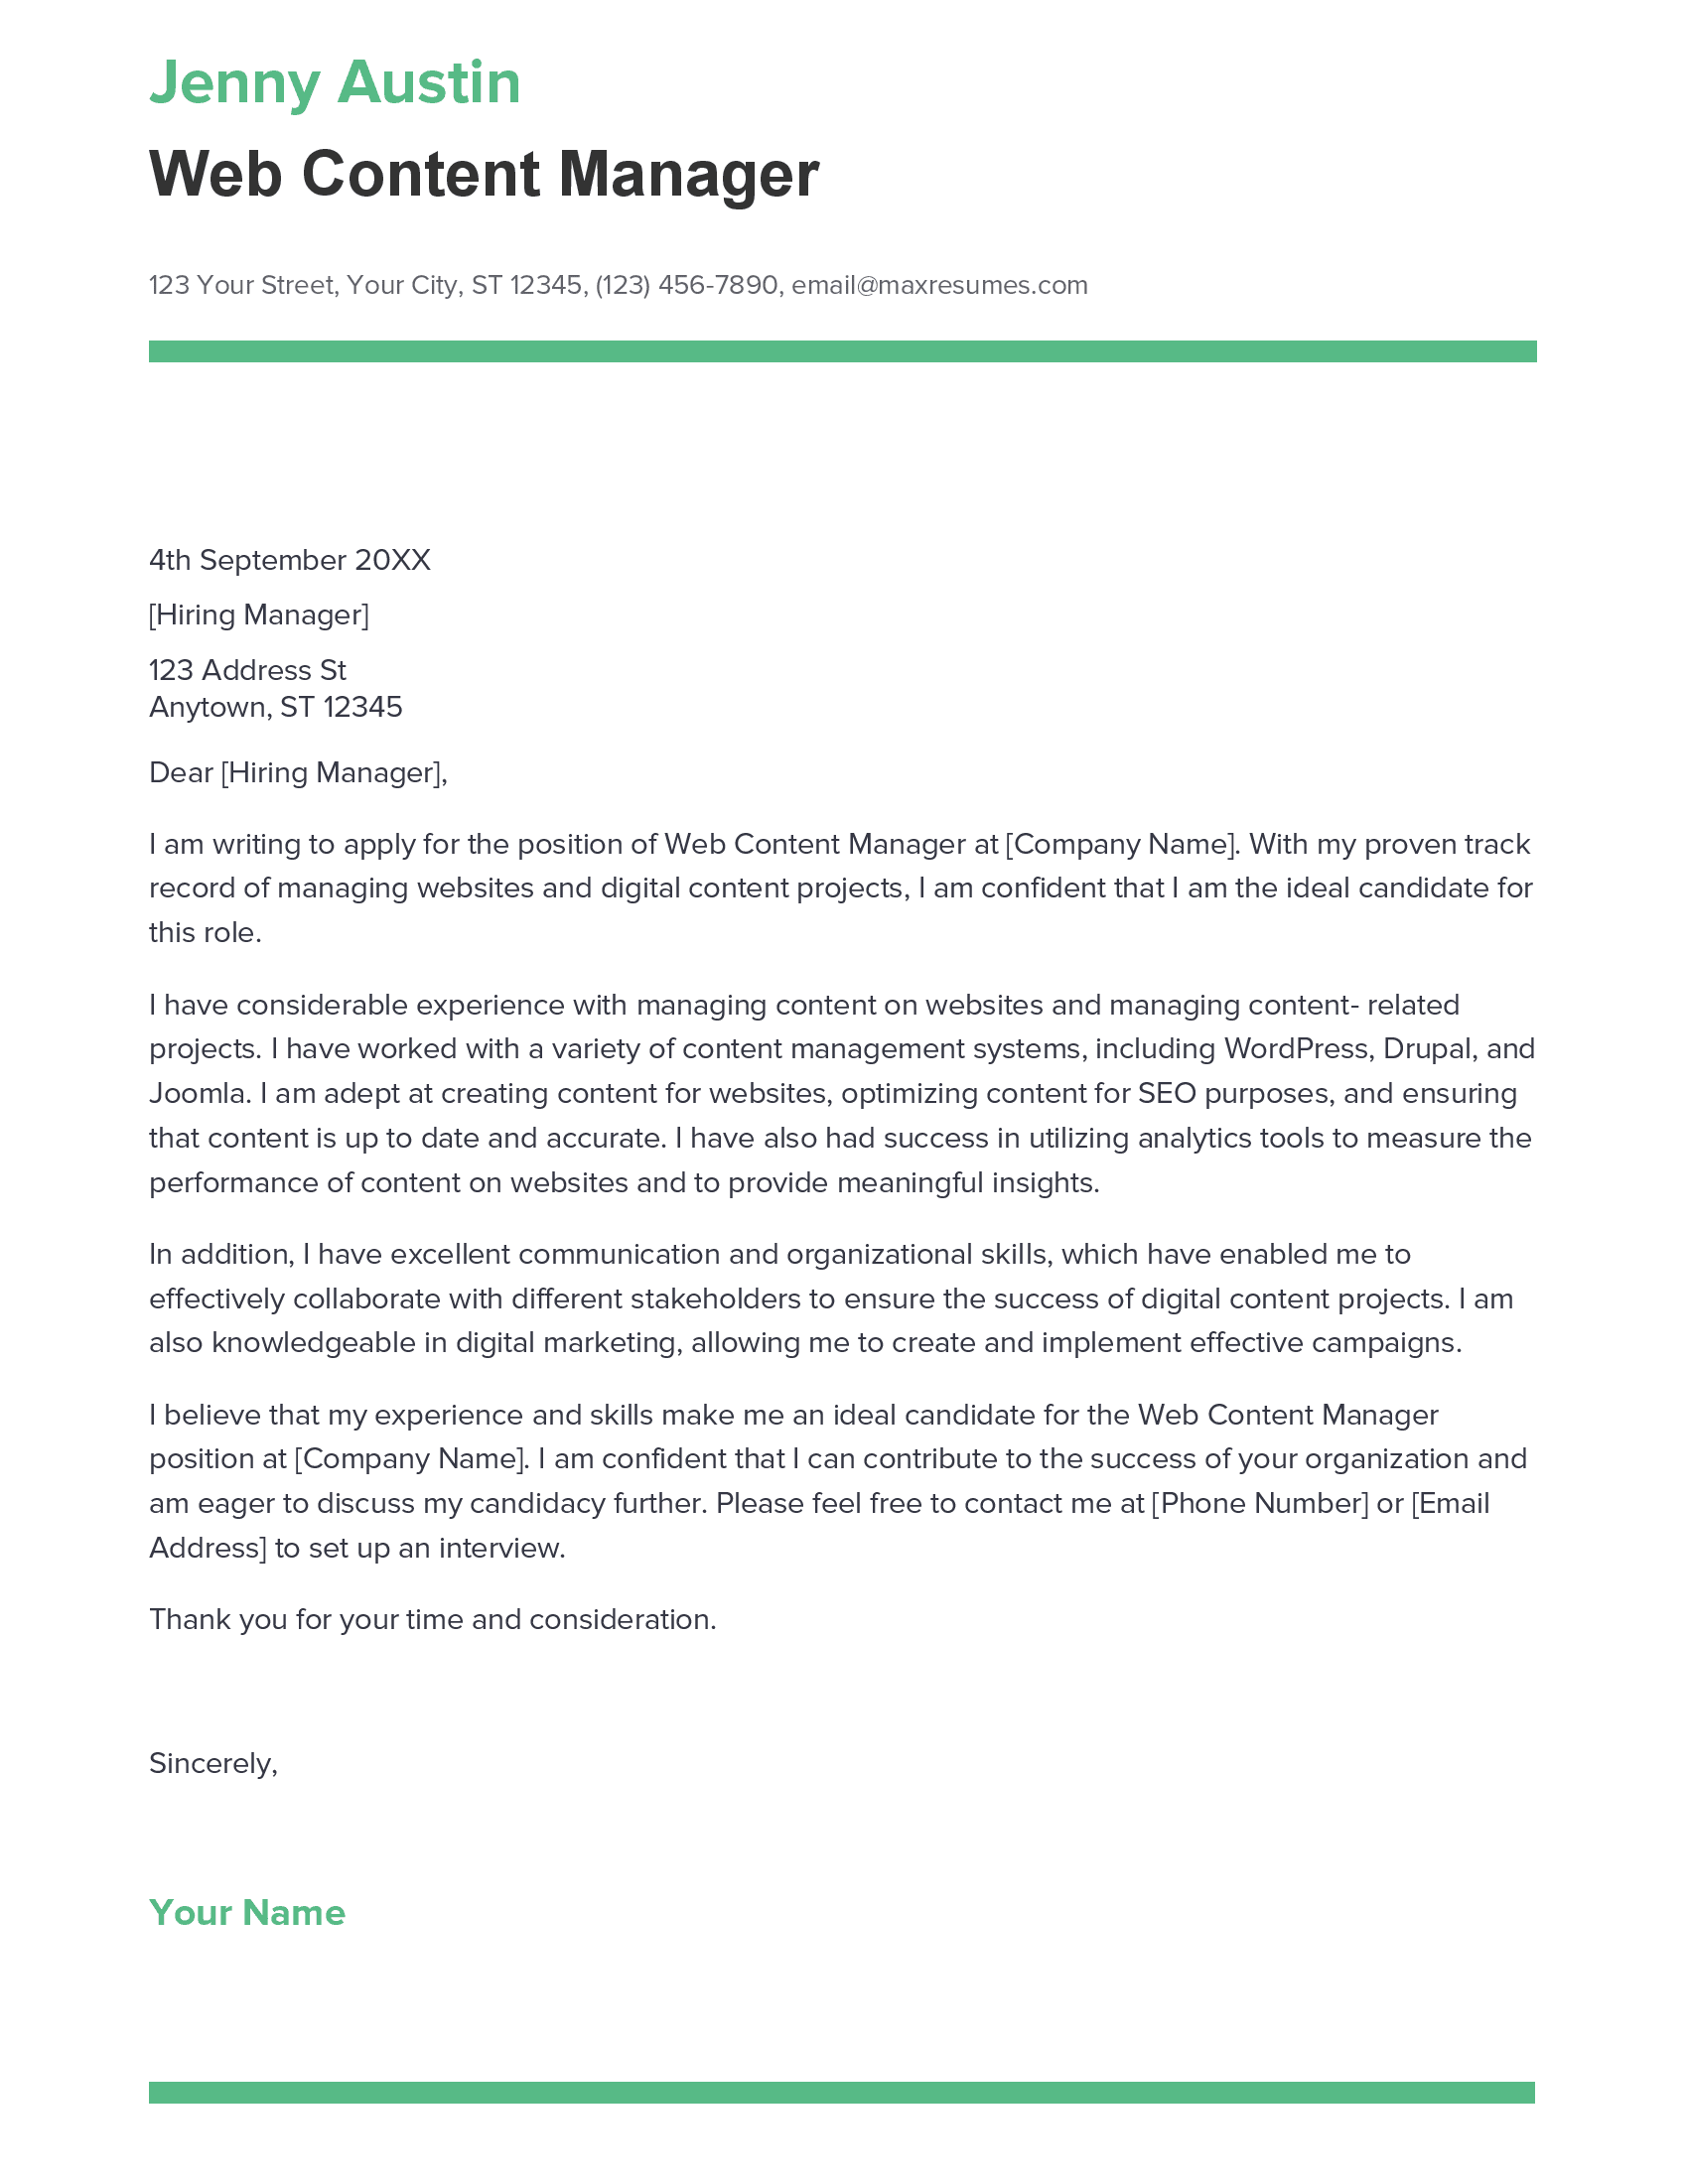 web content manager cover letter